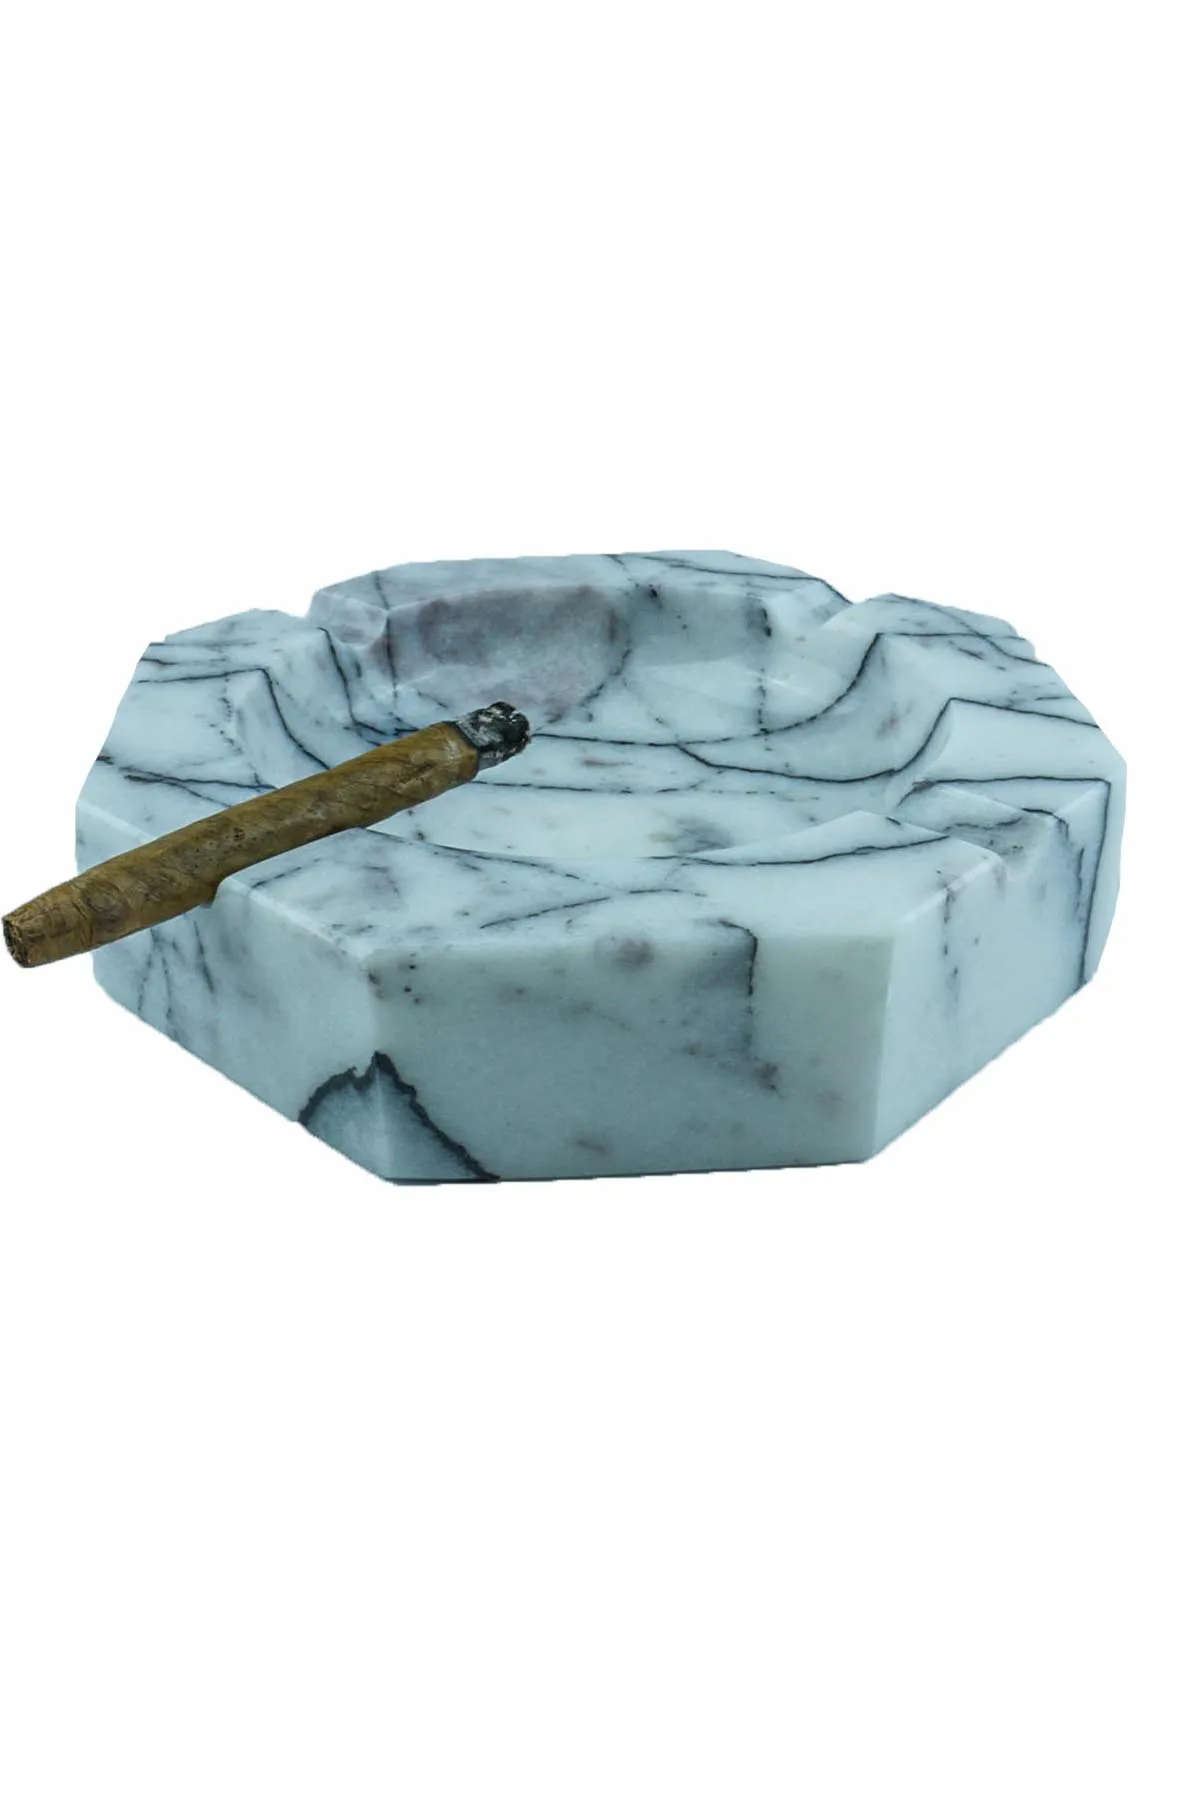 

Natural Marble Smoking Accessories Ashtray Bulk Cool European Decor Gifts Boyfriend Cigar Cigarette Weed Decorative Trays